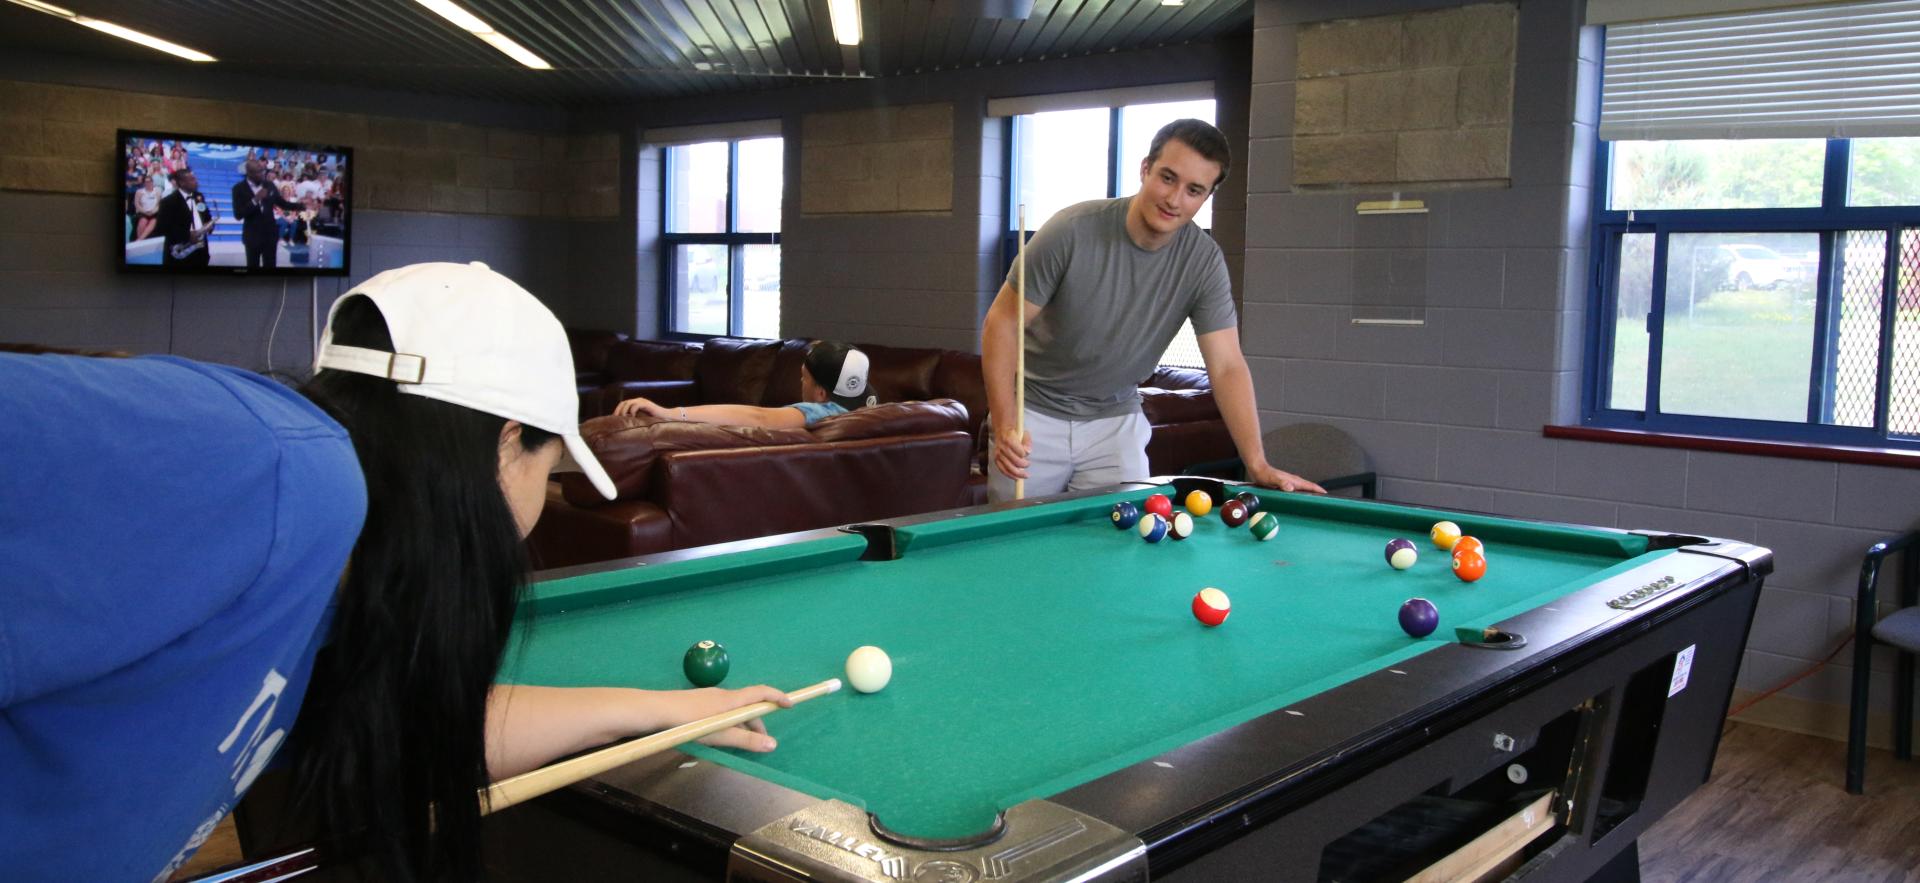 male and female students shooting pool in residence lounge